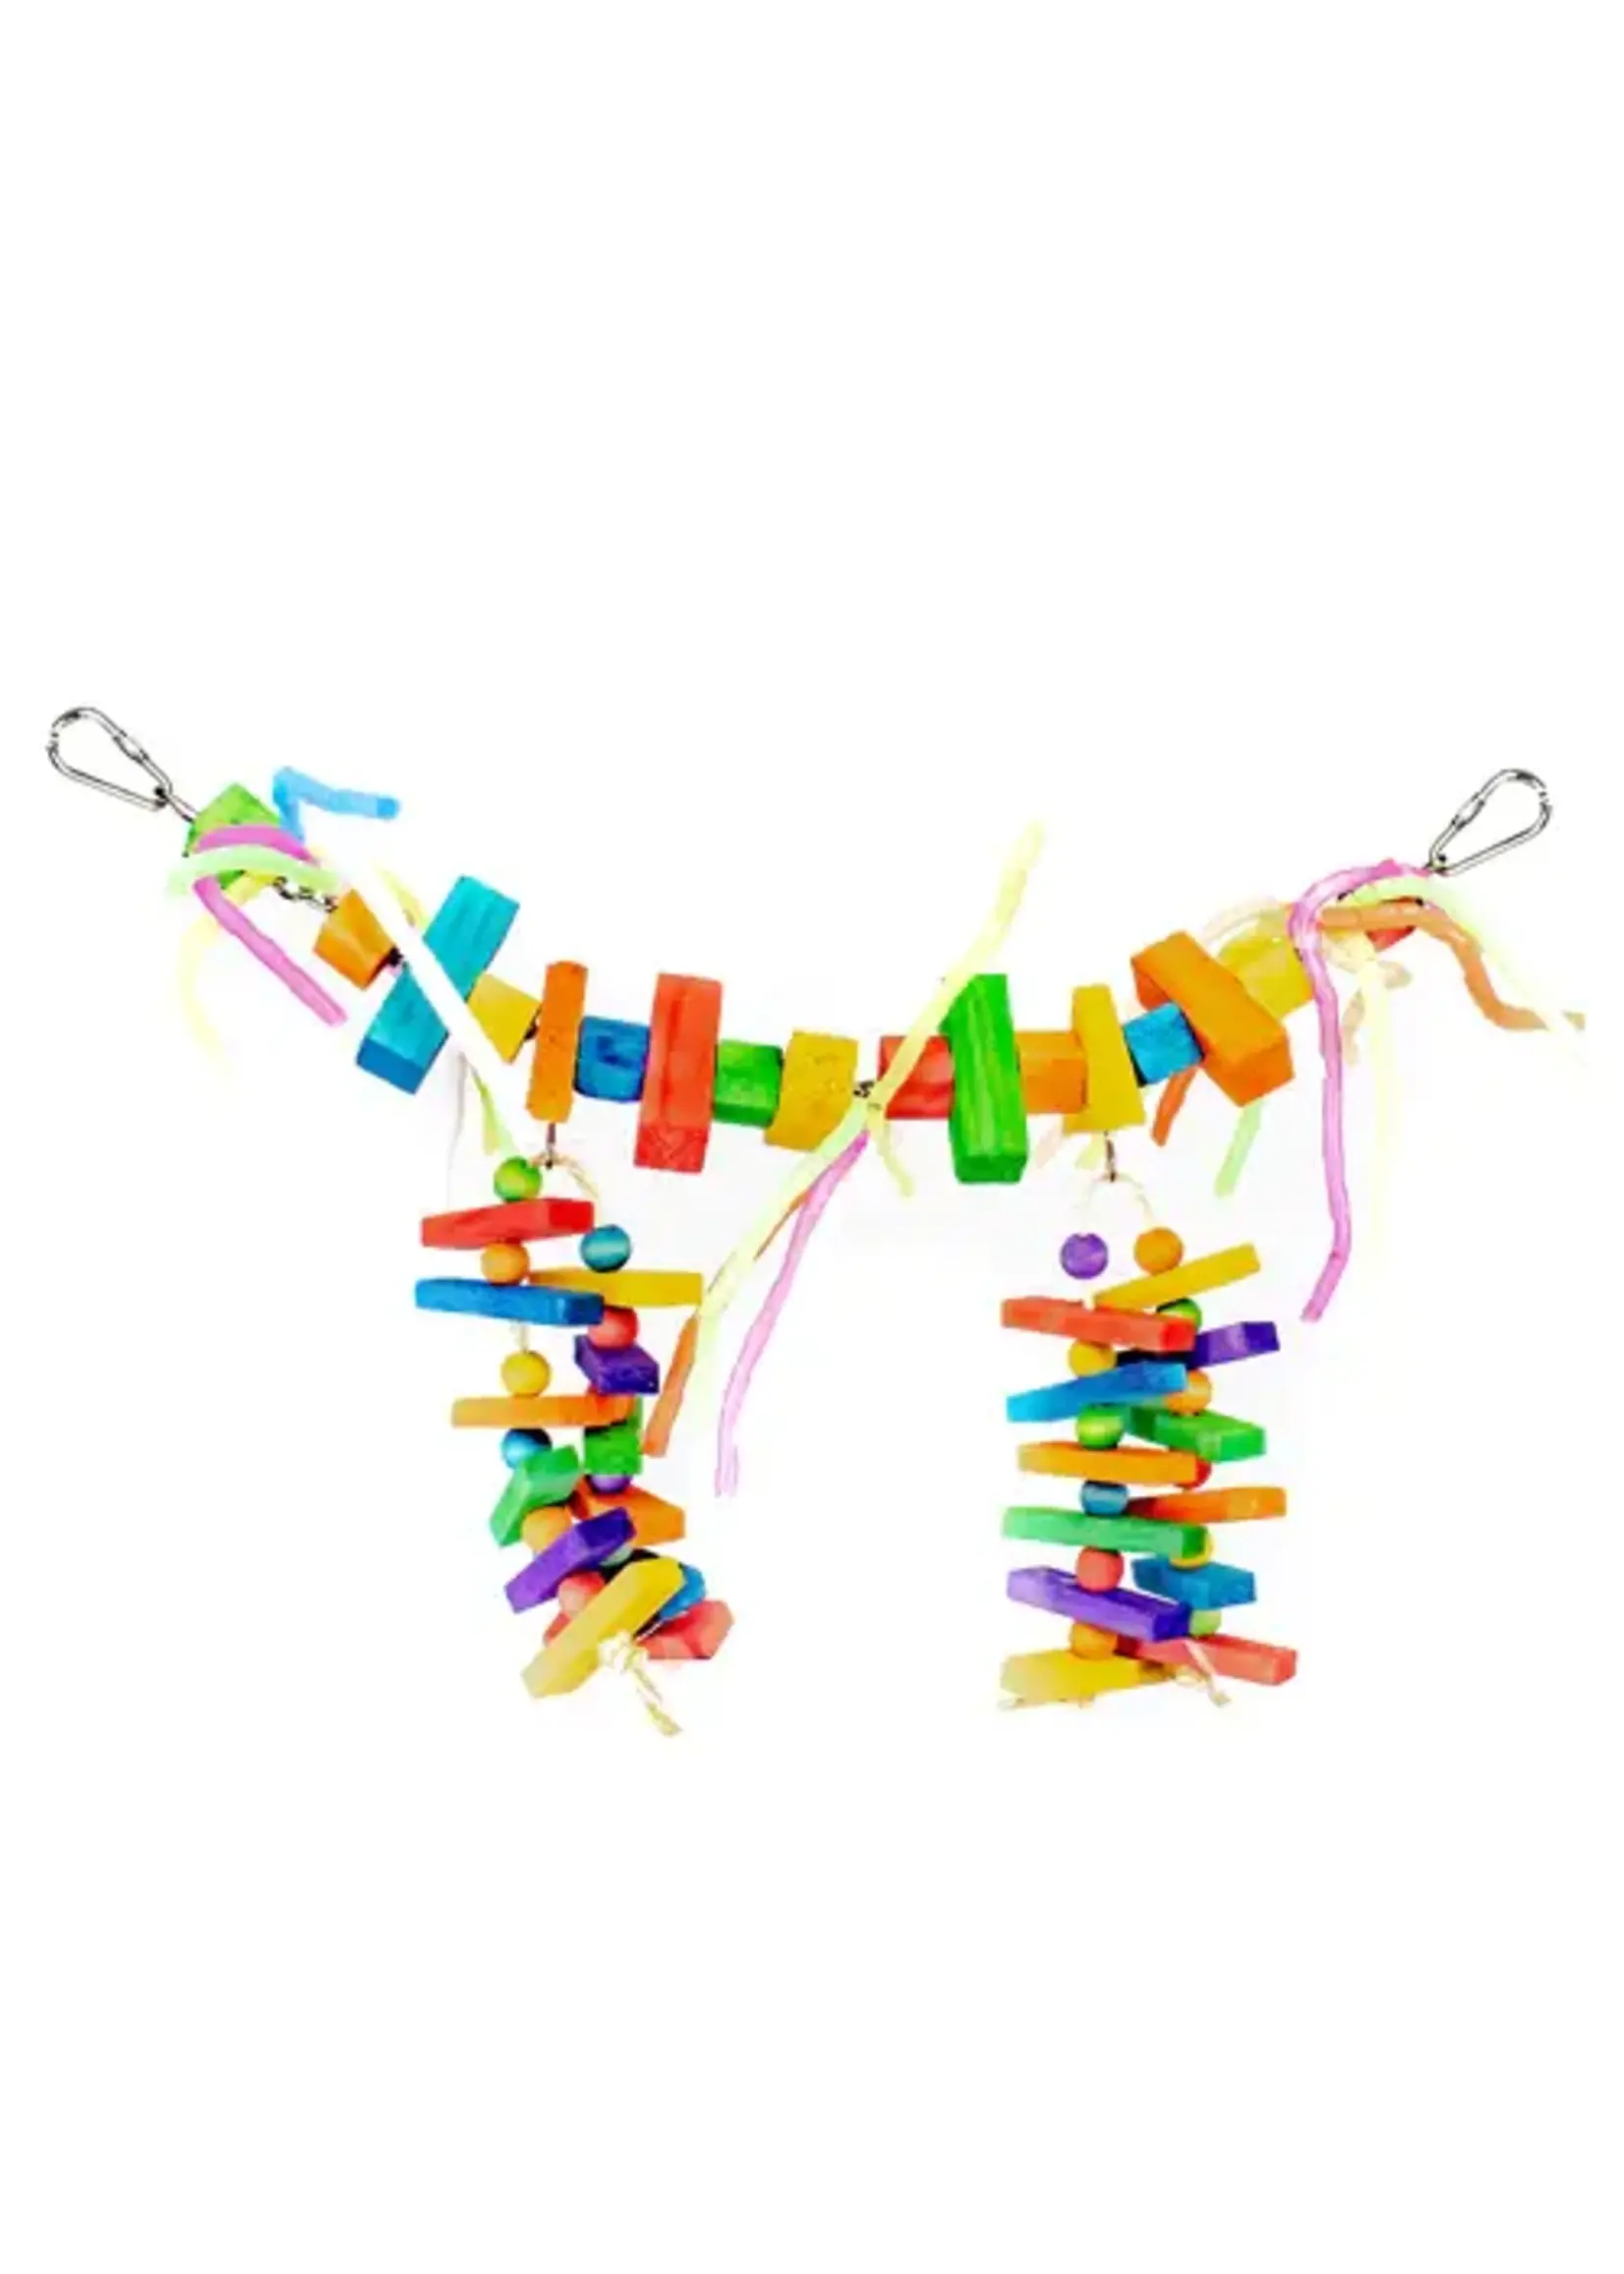 Kings Cages Kings Cages Rainbow Bridge With Spiral Cut Straws And Colorful Wood S016